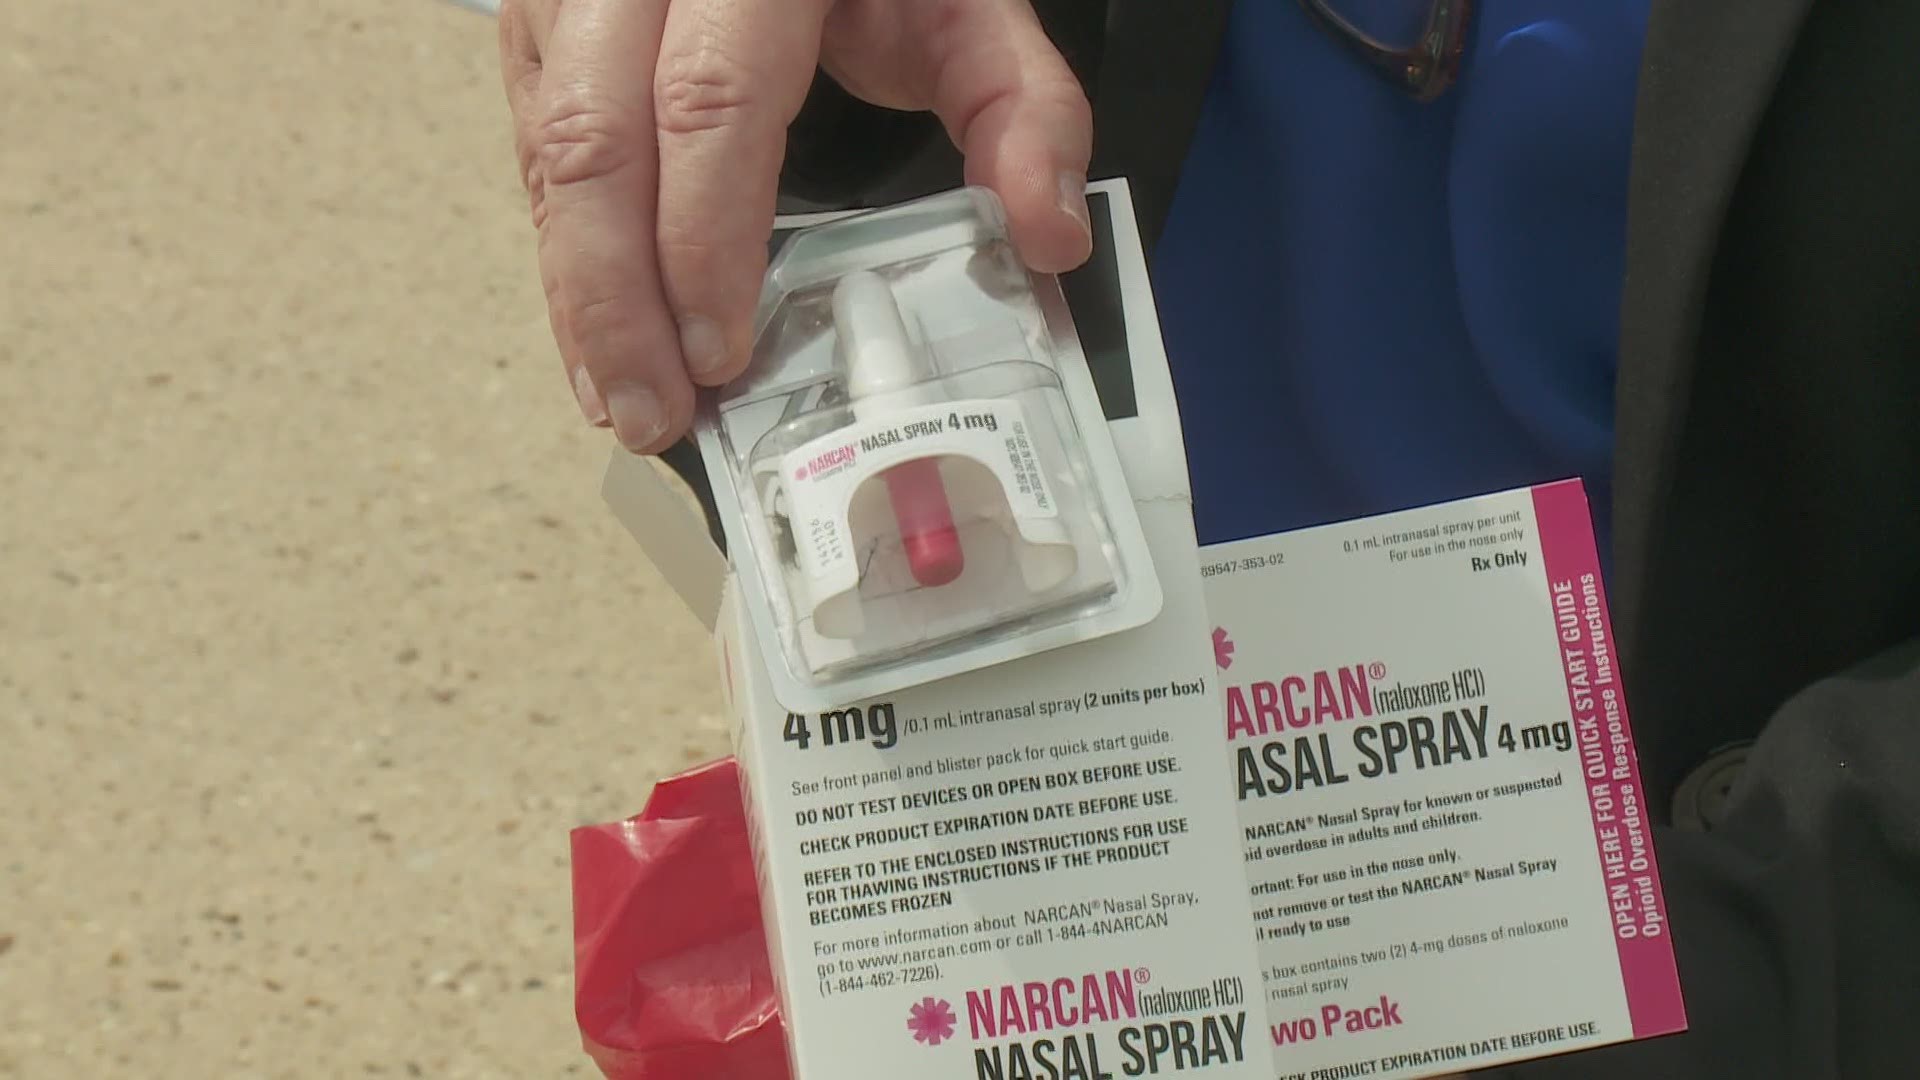 St. Tammany fire stations are trying to combat the opioid epidemic and put an end to drug overdoses by providing the counteractive nasal spray Narcan.